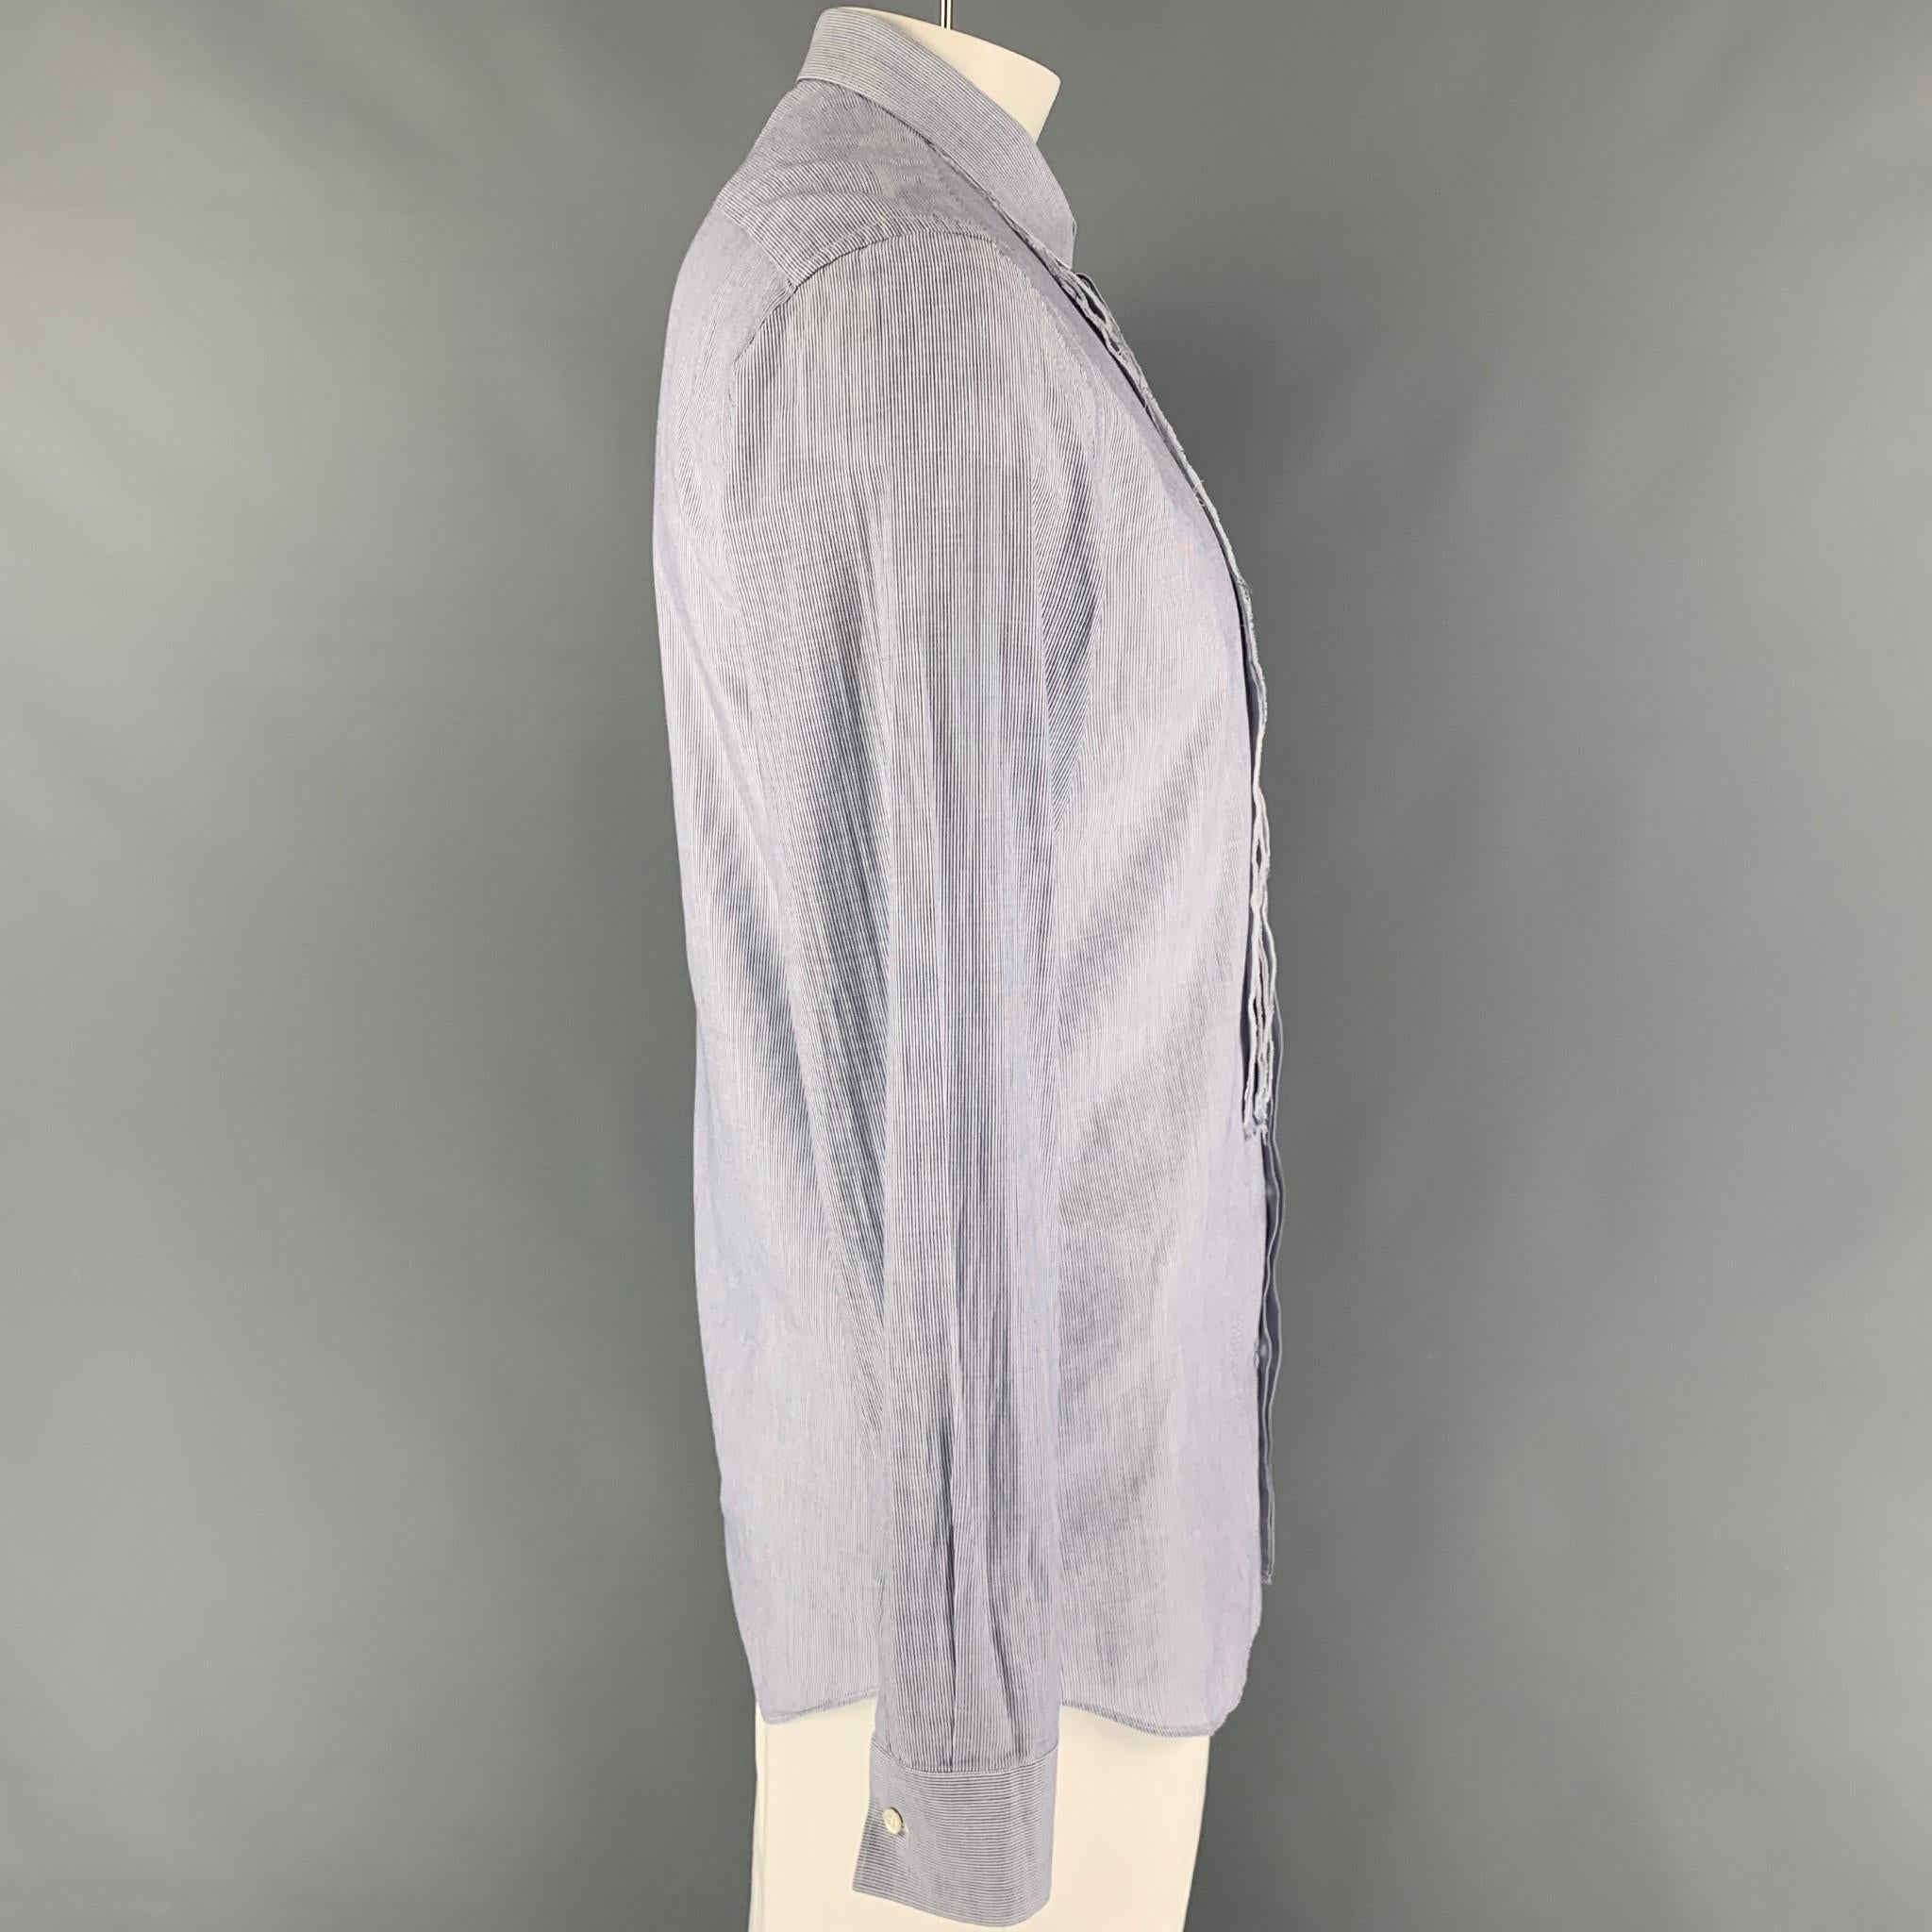 NEIL BARRETT long sleeve shirt comes in a blue stripe cotton featuring a slim fit, raw edge, spread collar, and a hidden placket closure. Made in Italy. 

Very Good Pre-Owned Condition.
Marked: 16.5/42

Measurements:

Shoulder: 19 in.
Chest: 42